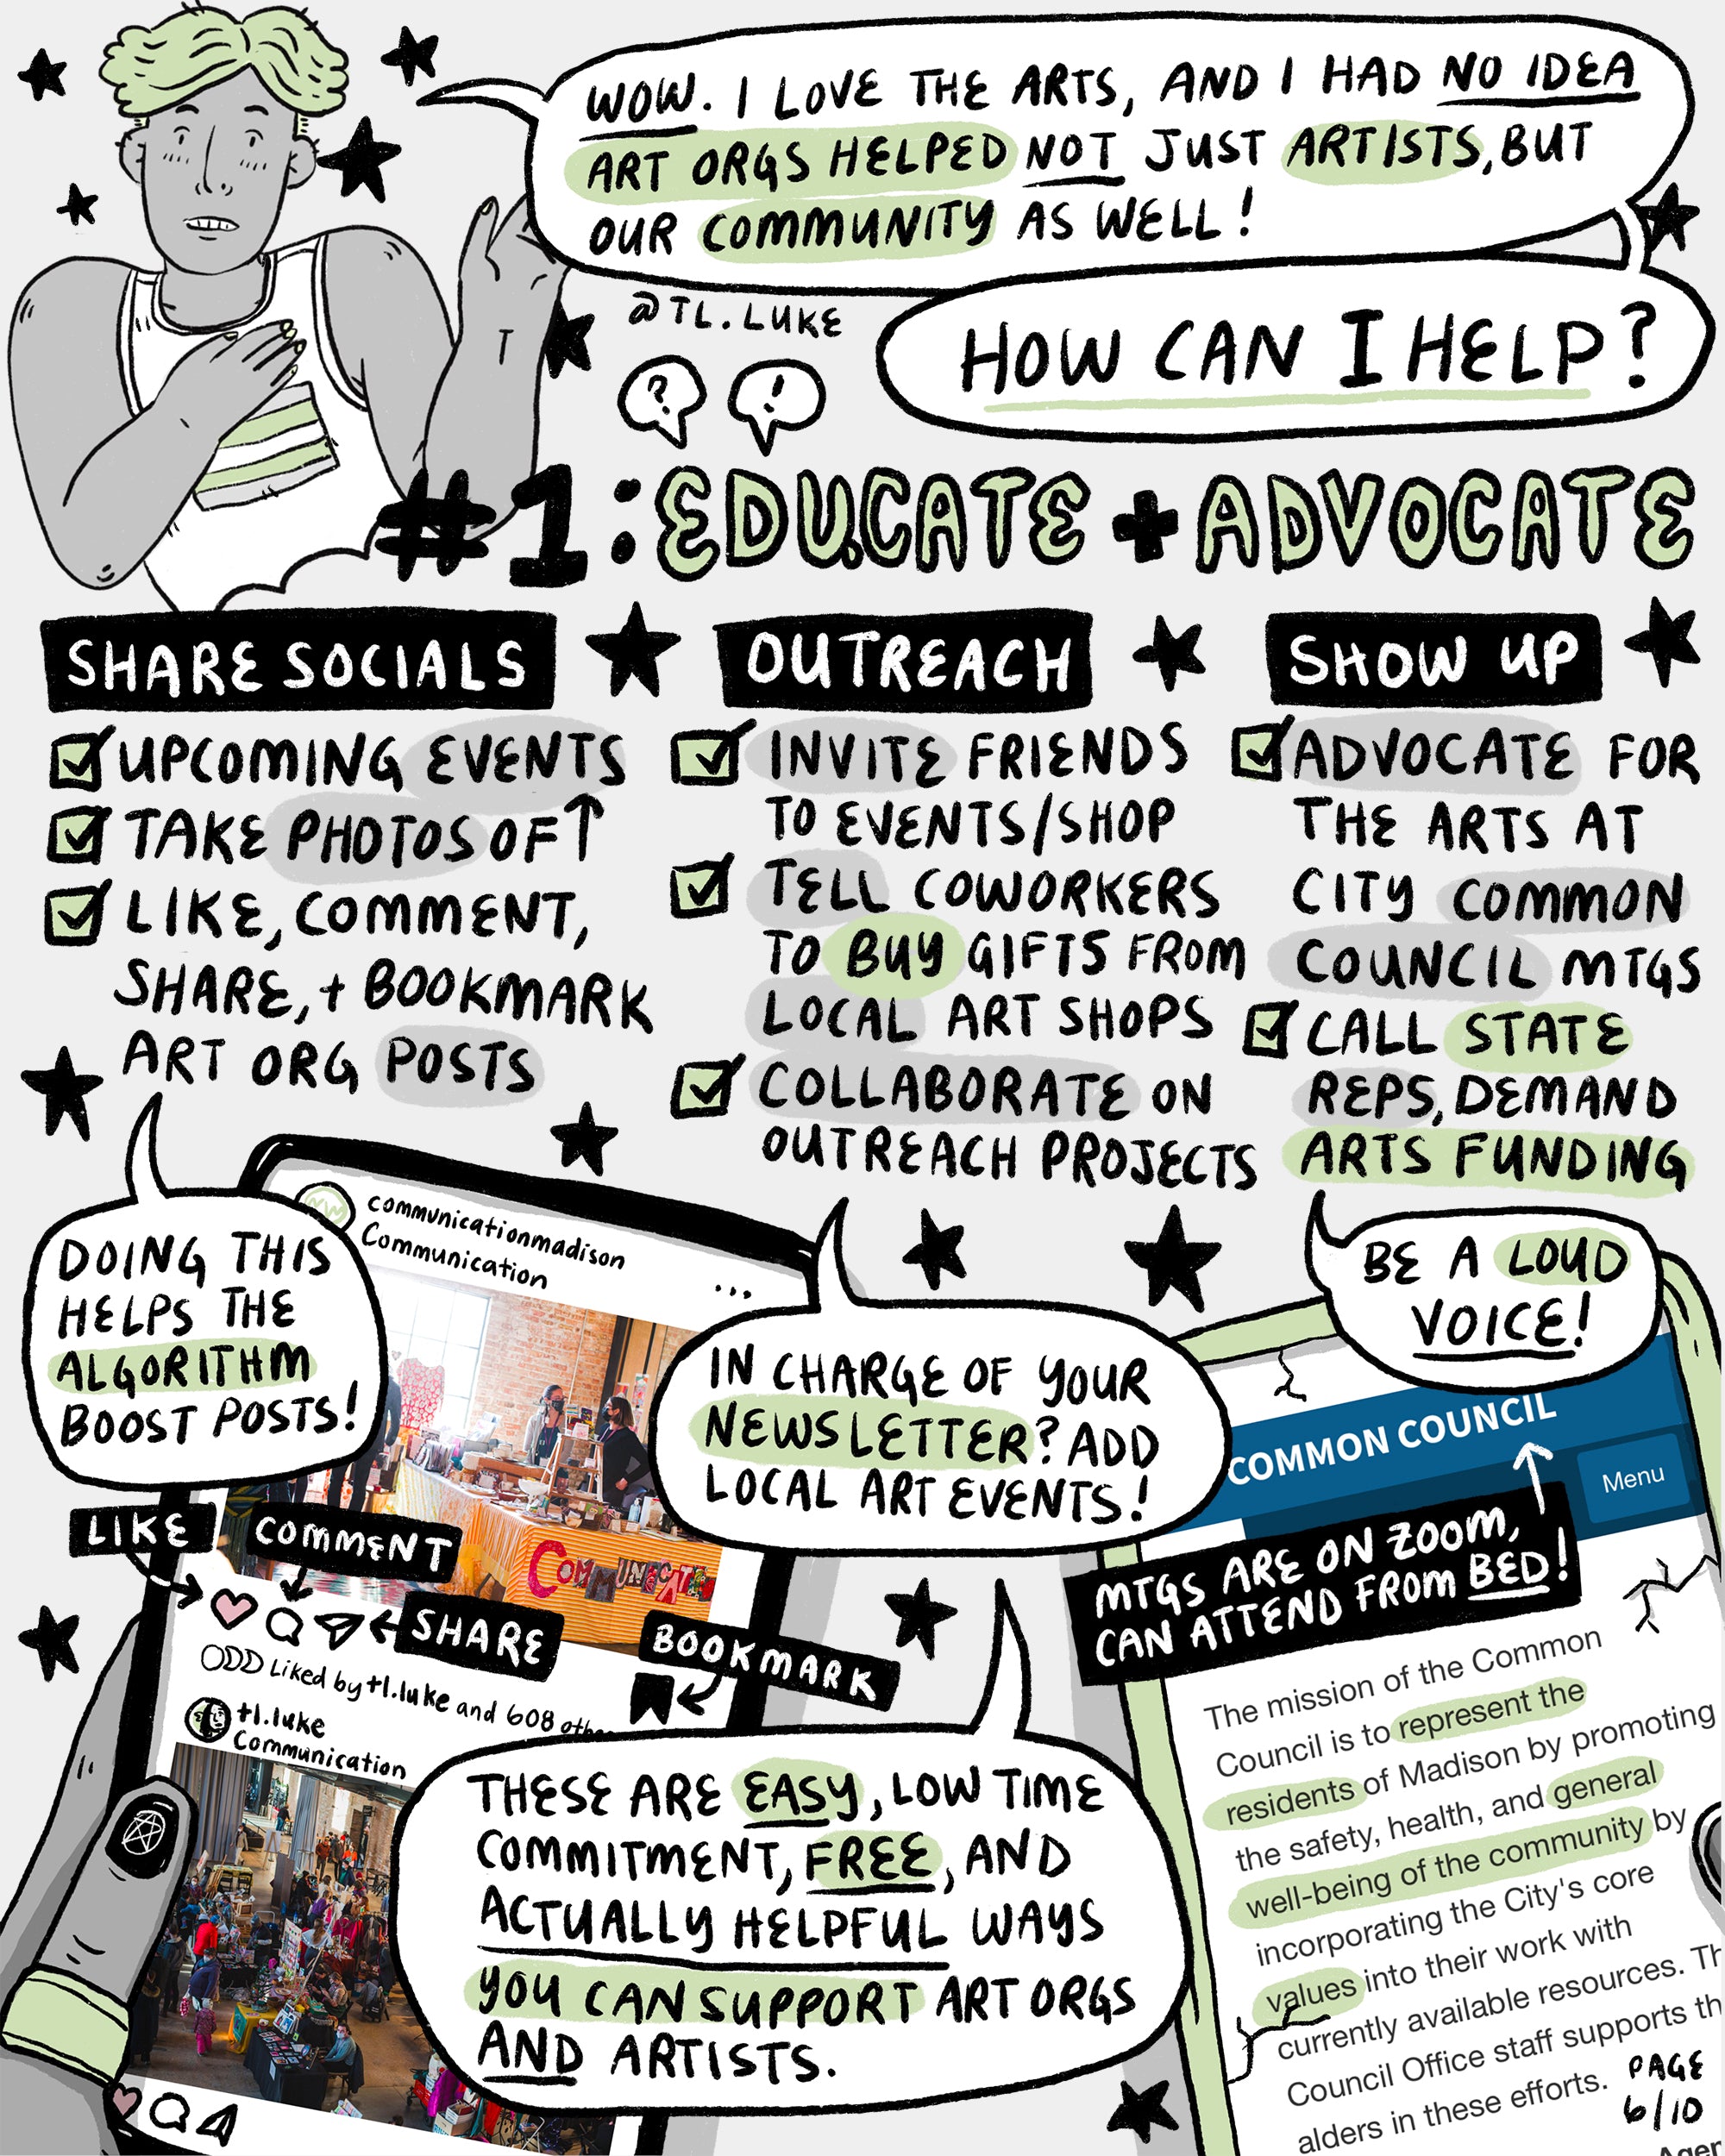 Page 6 of Auntie Luke’s Guide to Wisconsin’s Art Economy, Part 2 covers the action item “Educate and Advocate.”